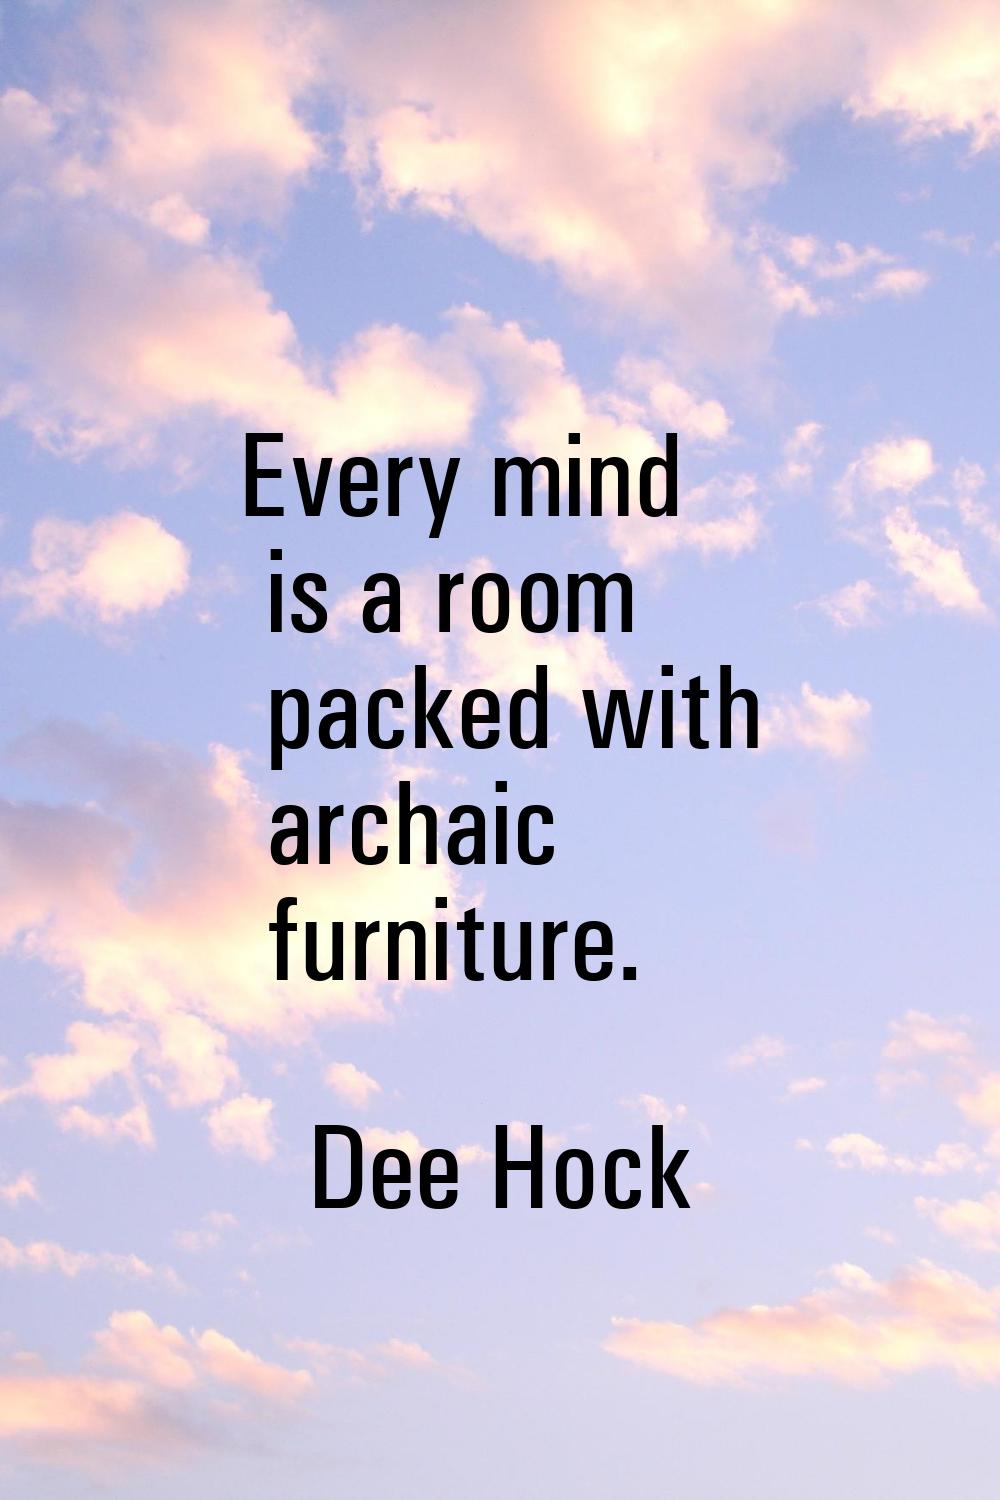 Every mind is a room packed with archaic furniture.